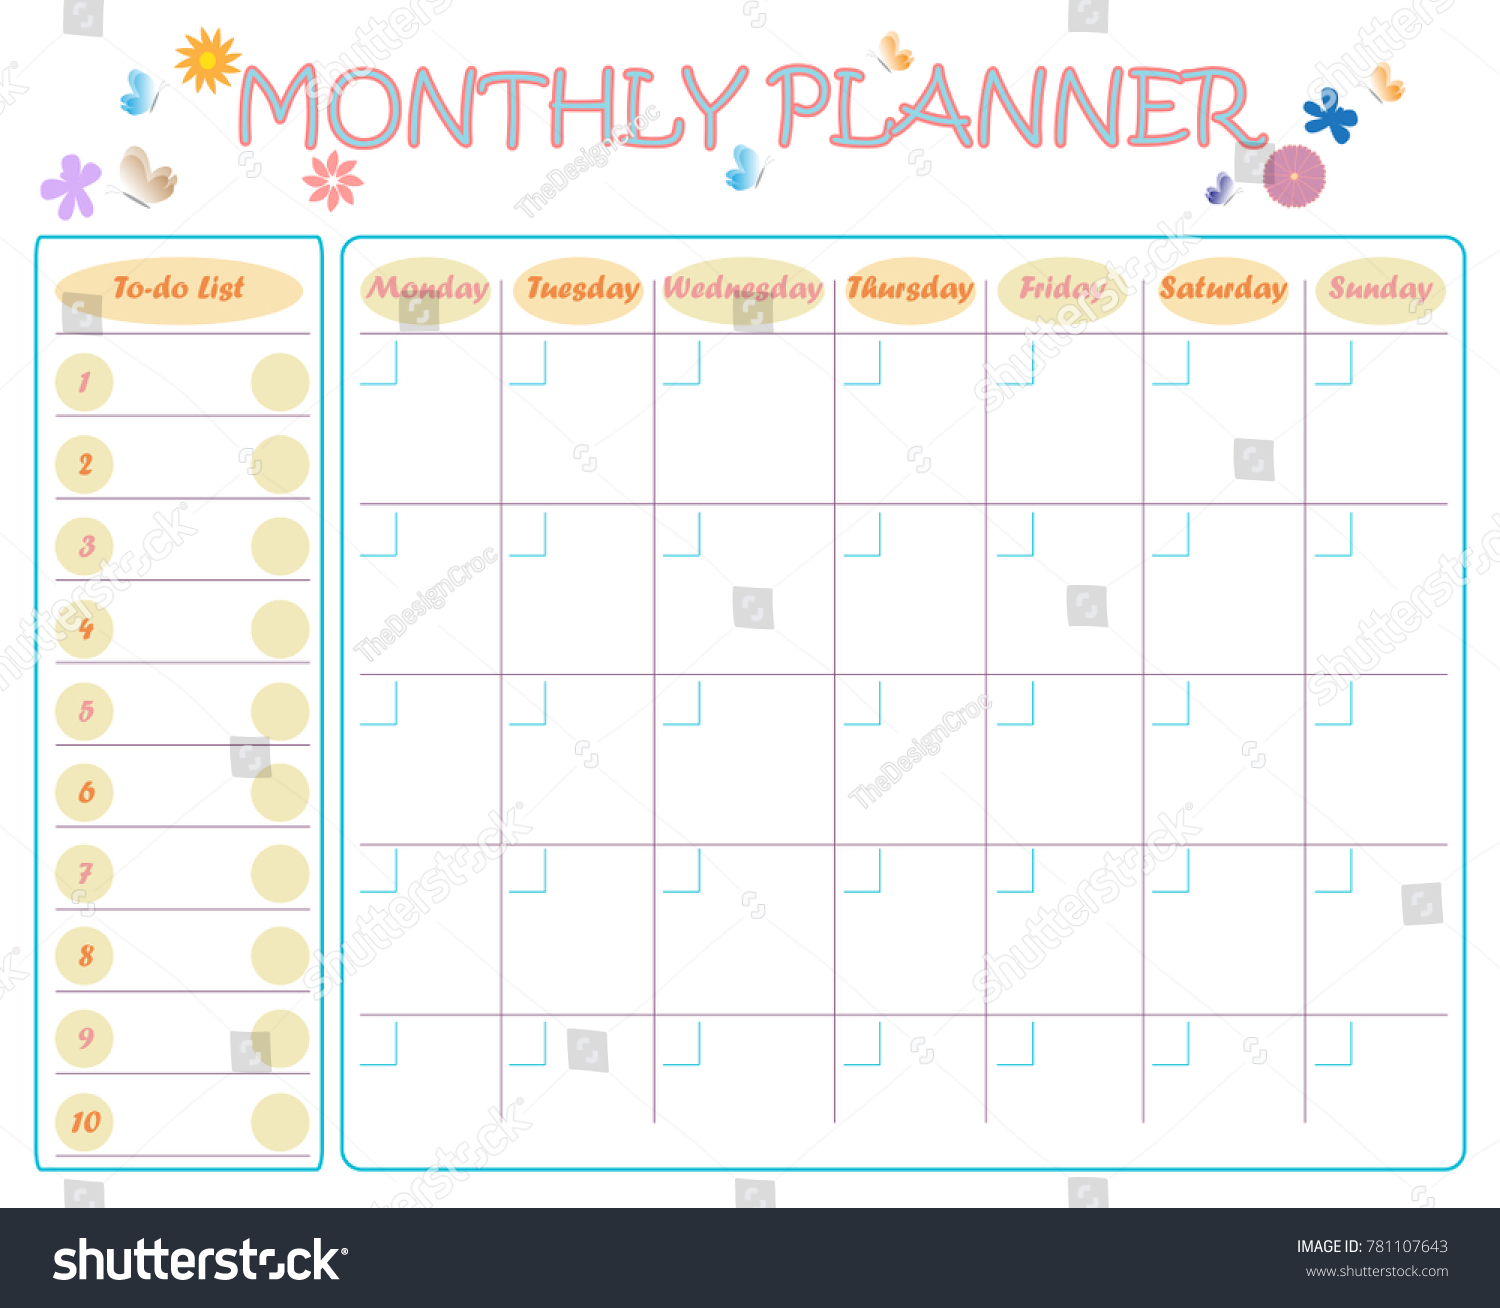 31+ Printable Monthly Calendar To Do List Images